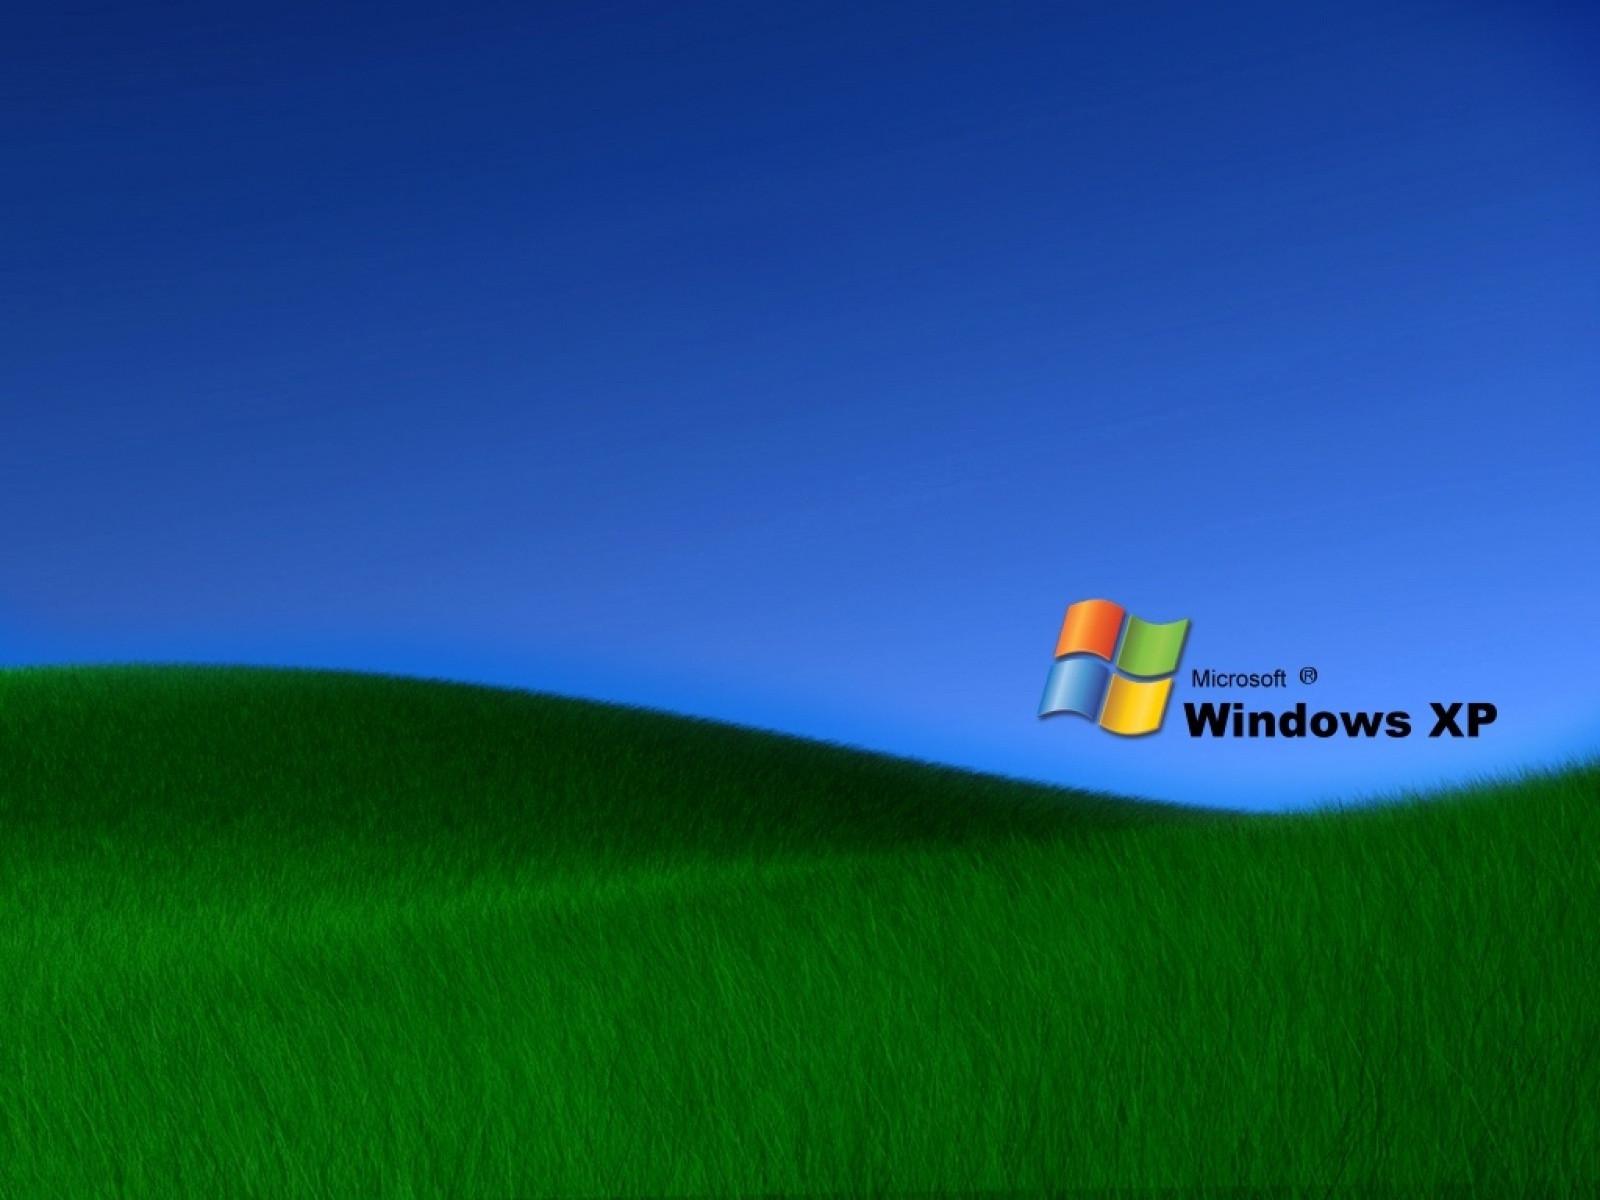 Windows Xp Wallpapers High Definition with HD Wallpaper - Kemecer.com